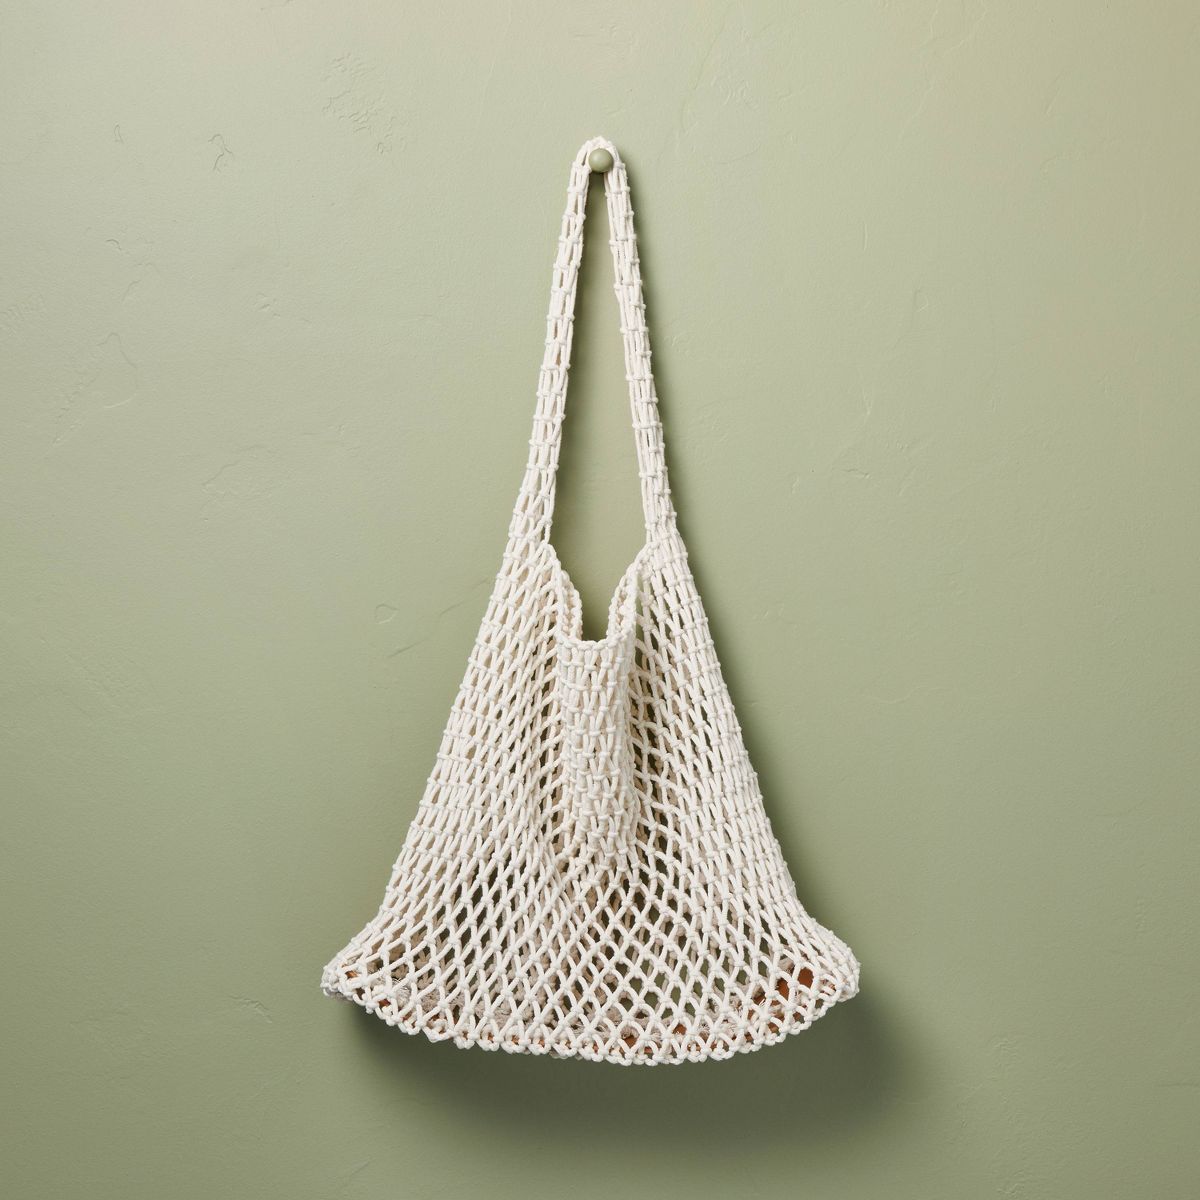 Woven Net Grocery Tote Bag - Hearth & Hand™ with Magnolia | Target